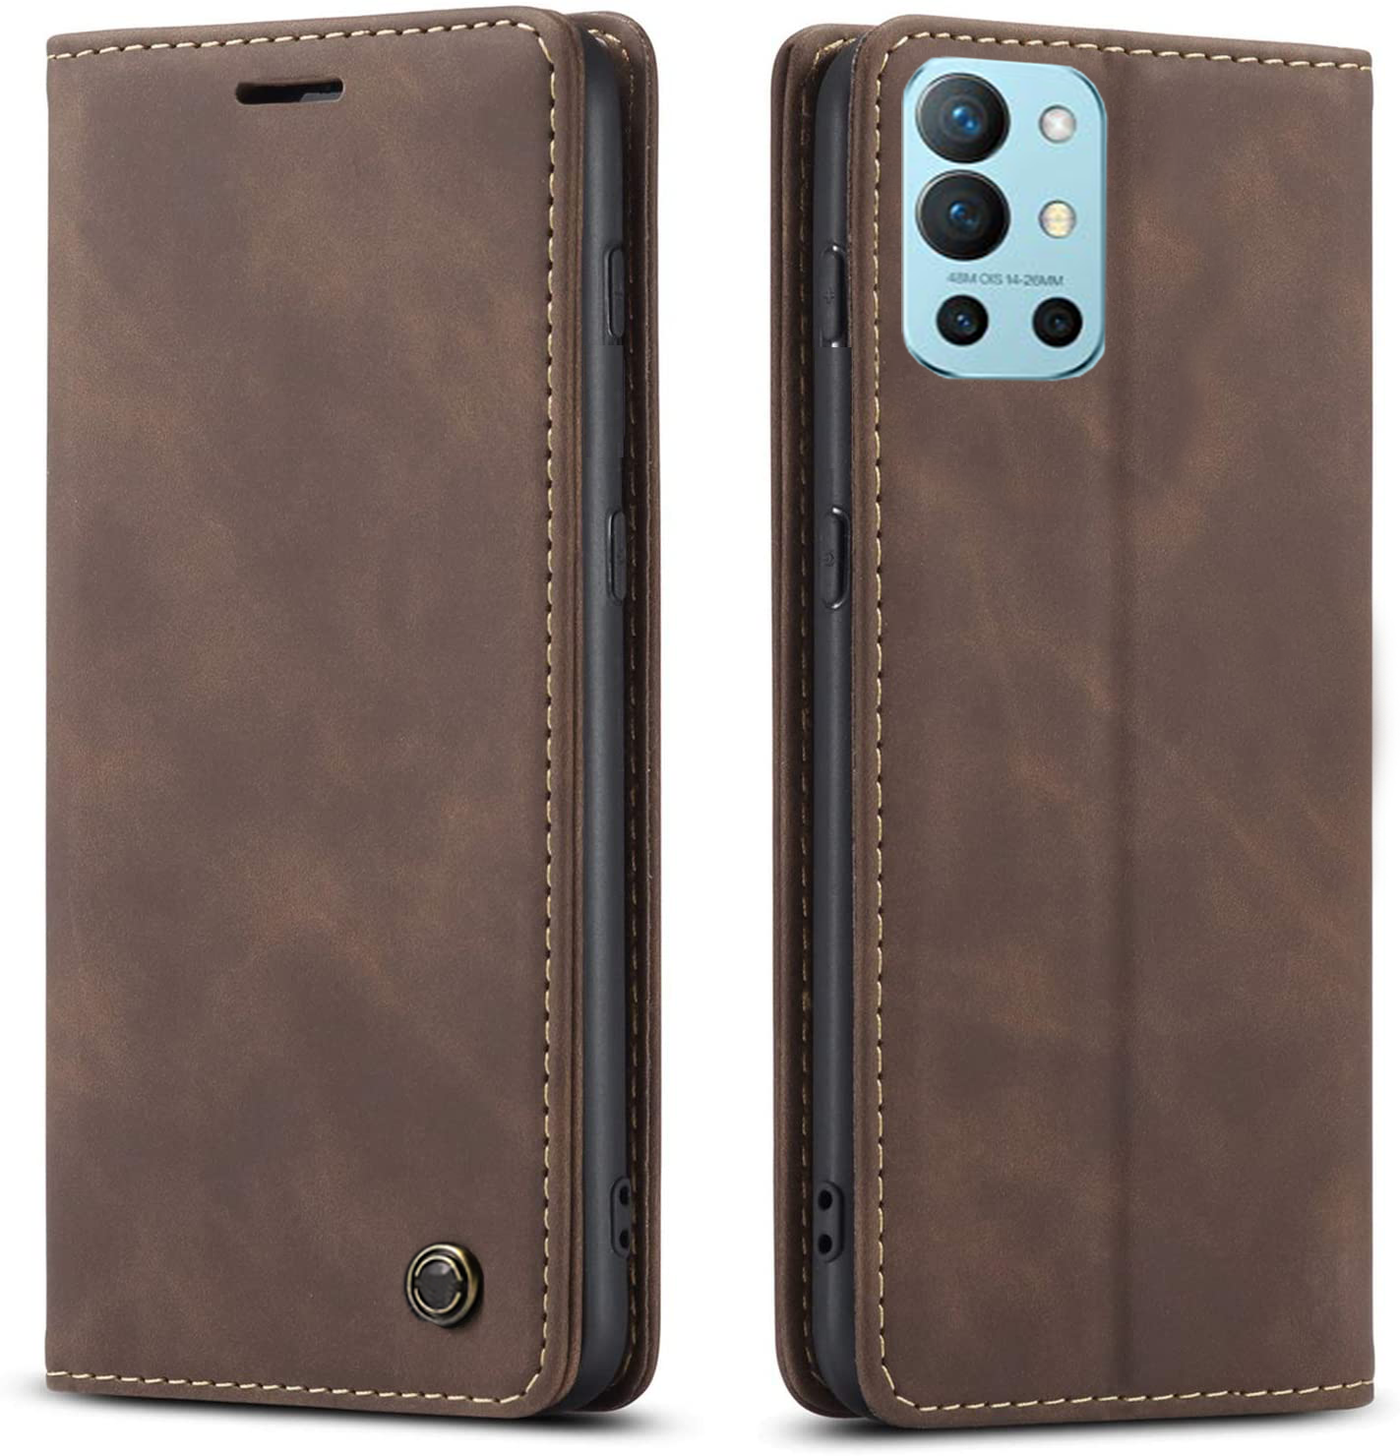 Oneplus 9R full body protection Leather Wallet flip case cover by Excelsior